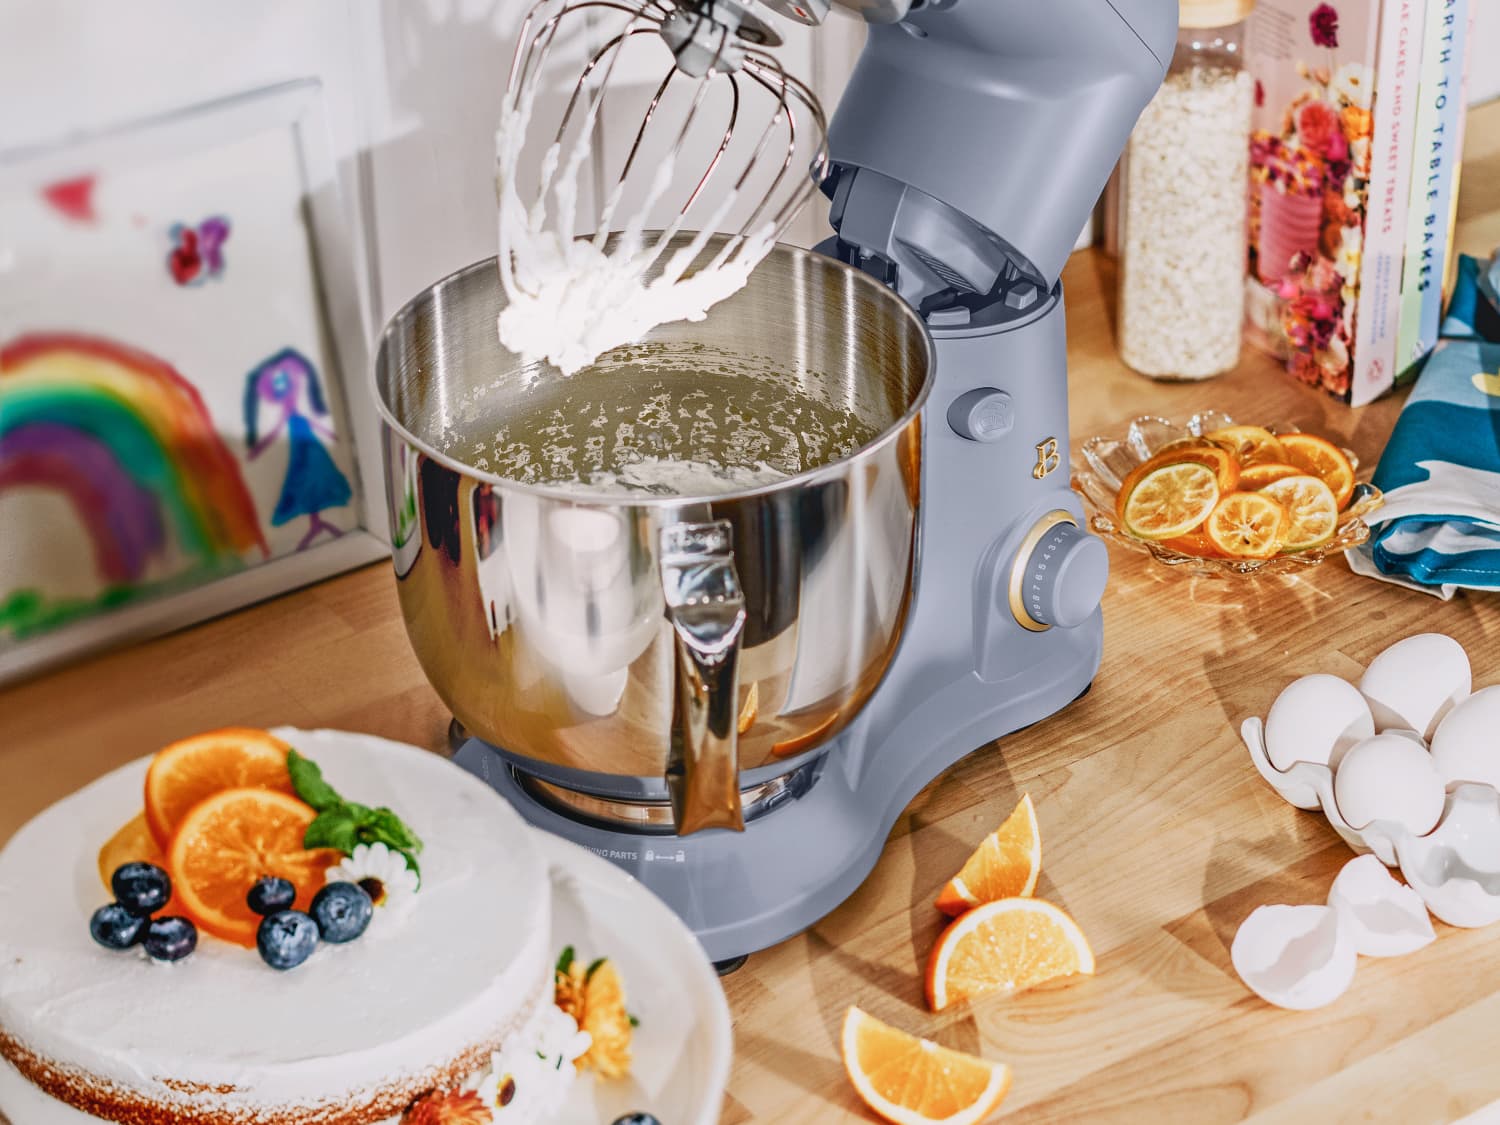 The Low-Cost Hack You Need For An Instant Stand Mixer Splash Guard